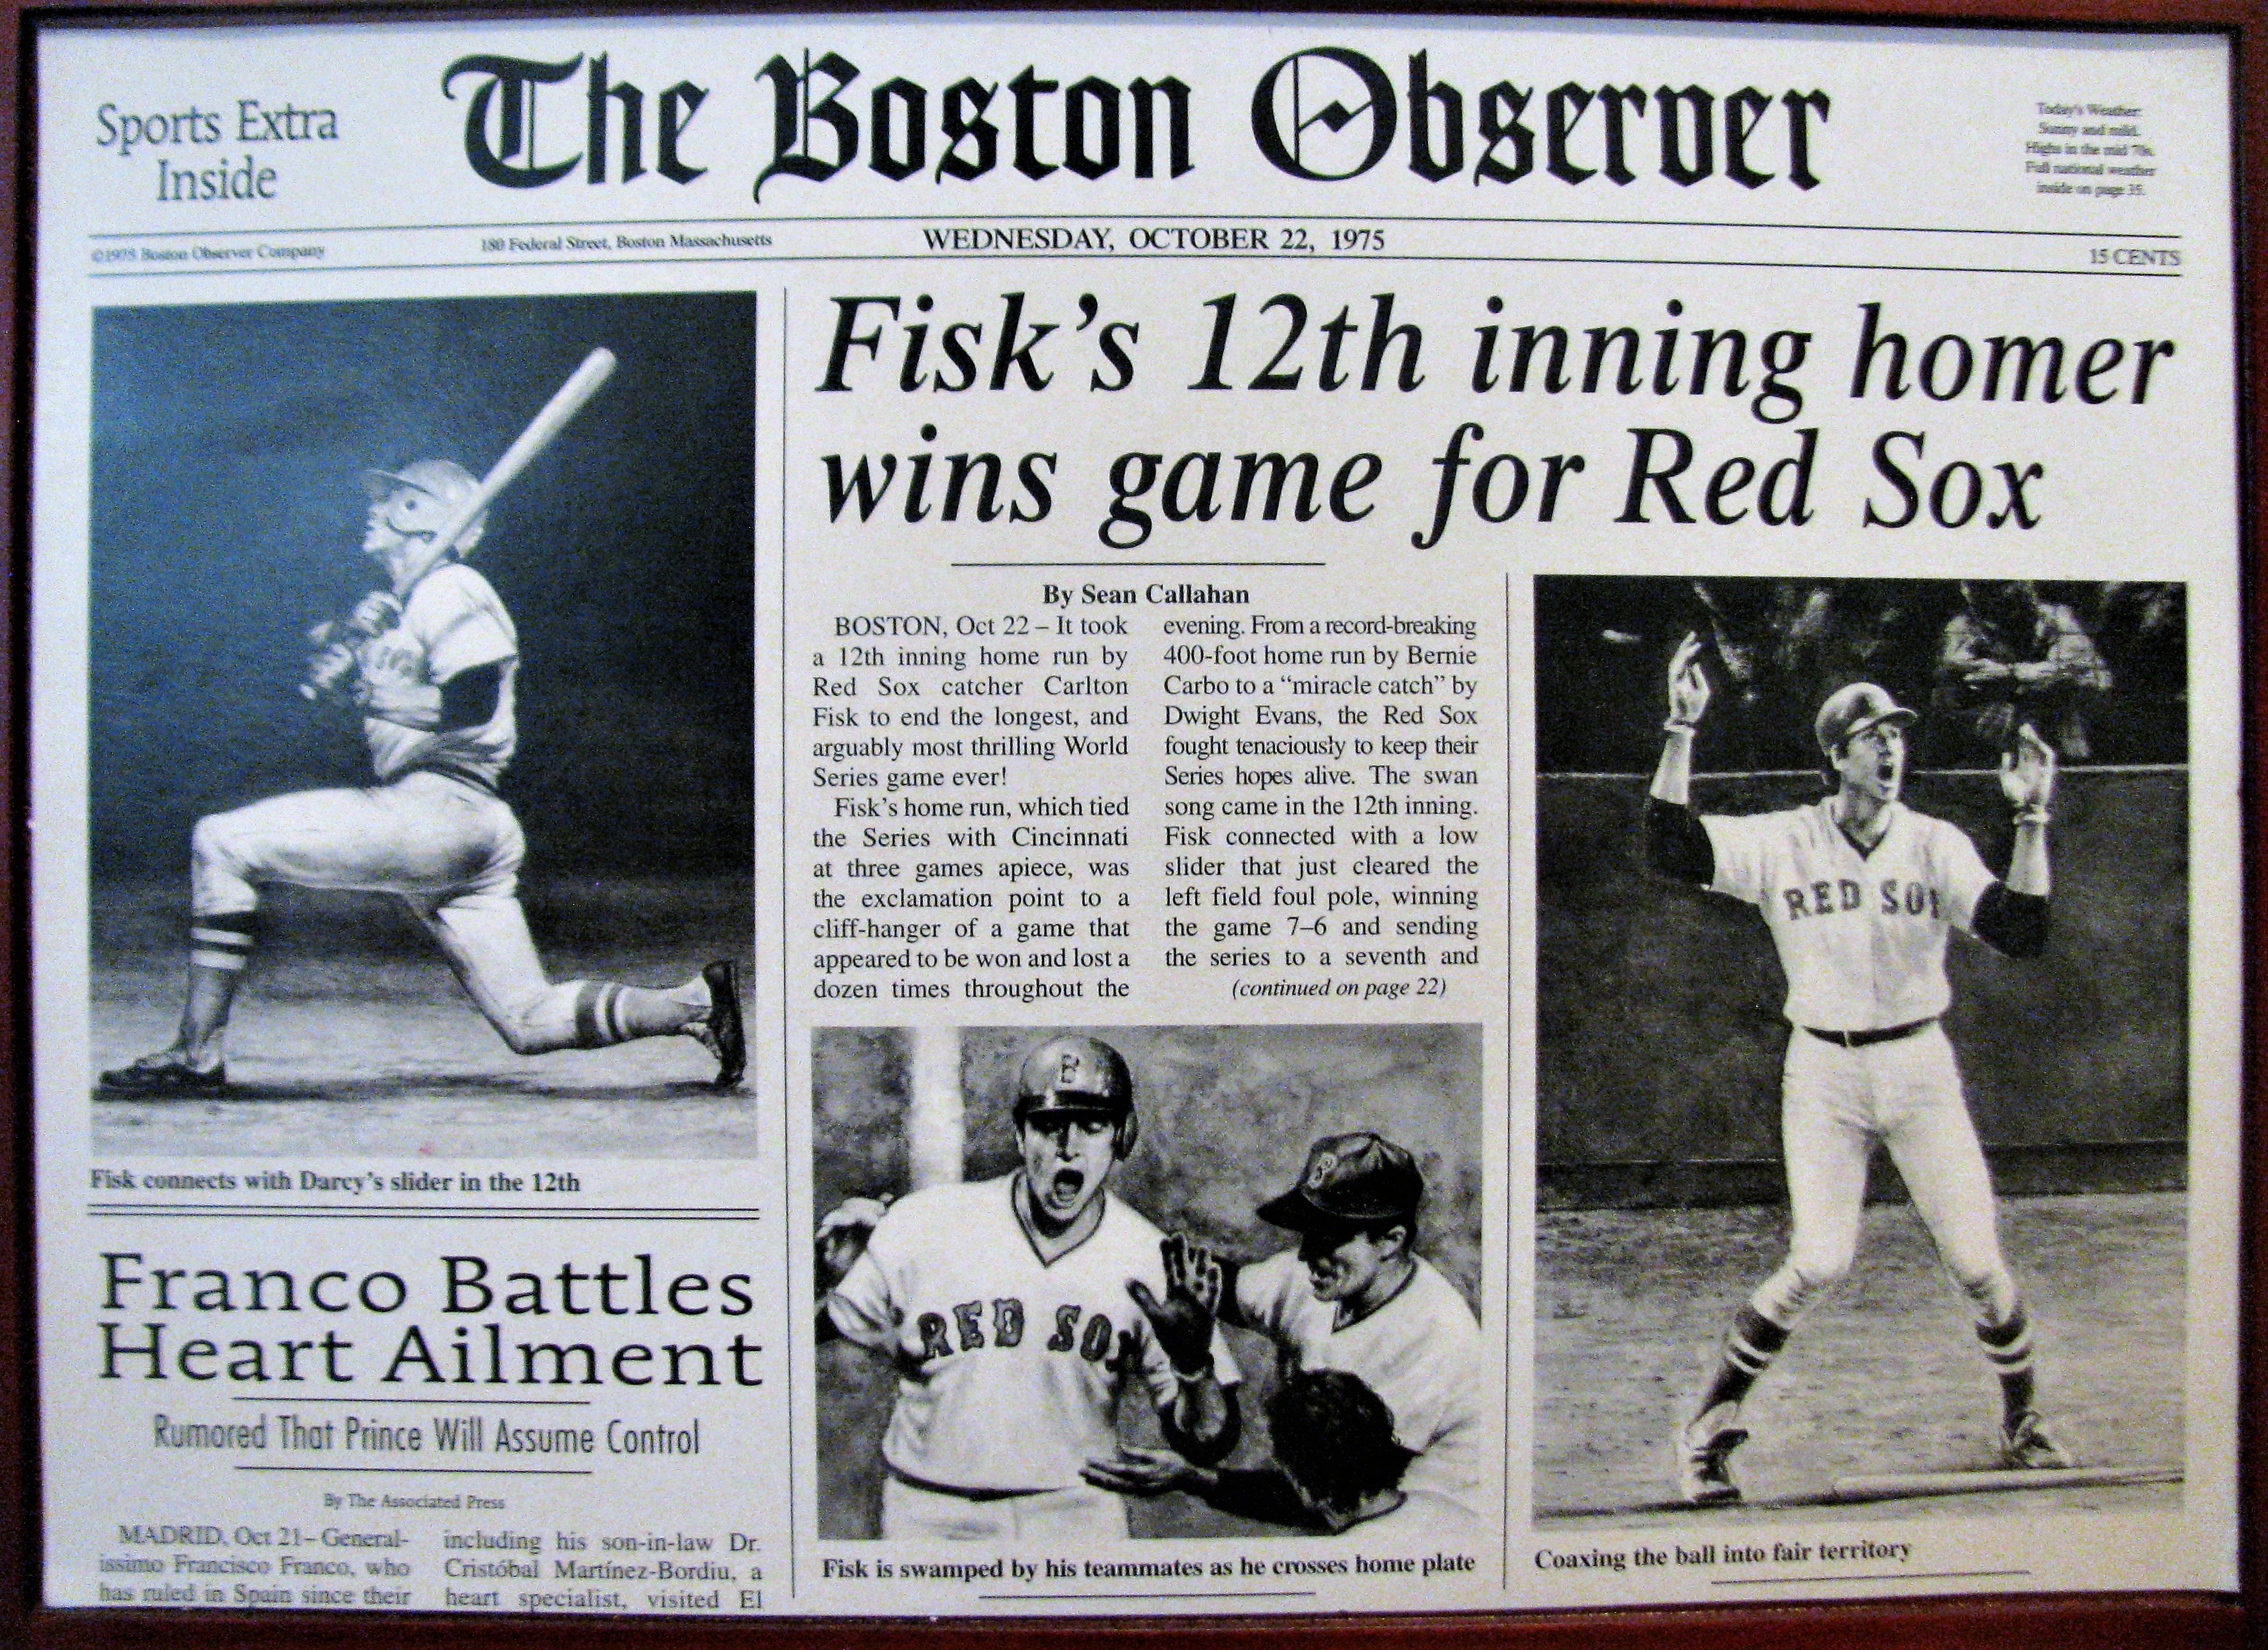 Lot Detail - CARLTON FISK FAMOUS WORLD SERIES HOME RUN DANBURY MINT  STATUE -SIGNED BY FISK & BENCH - TRISTAR